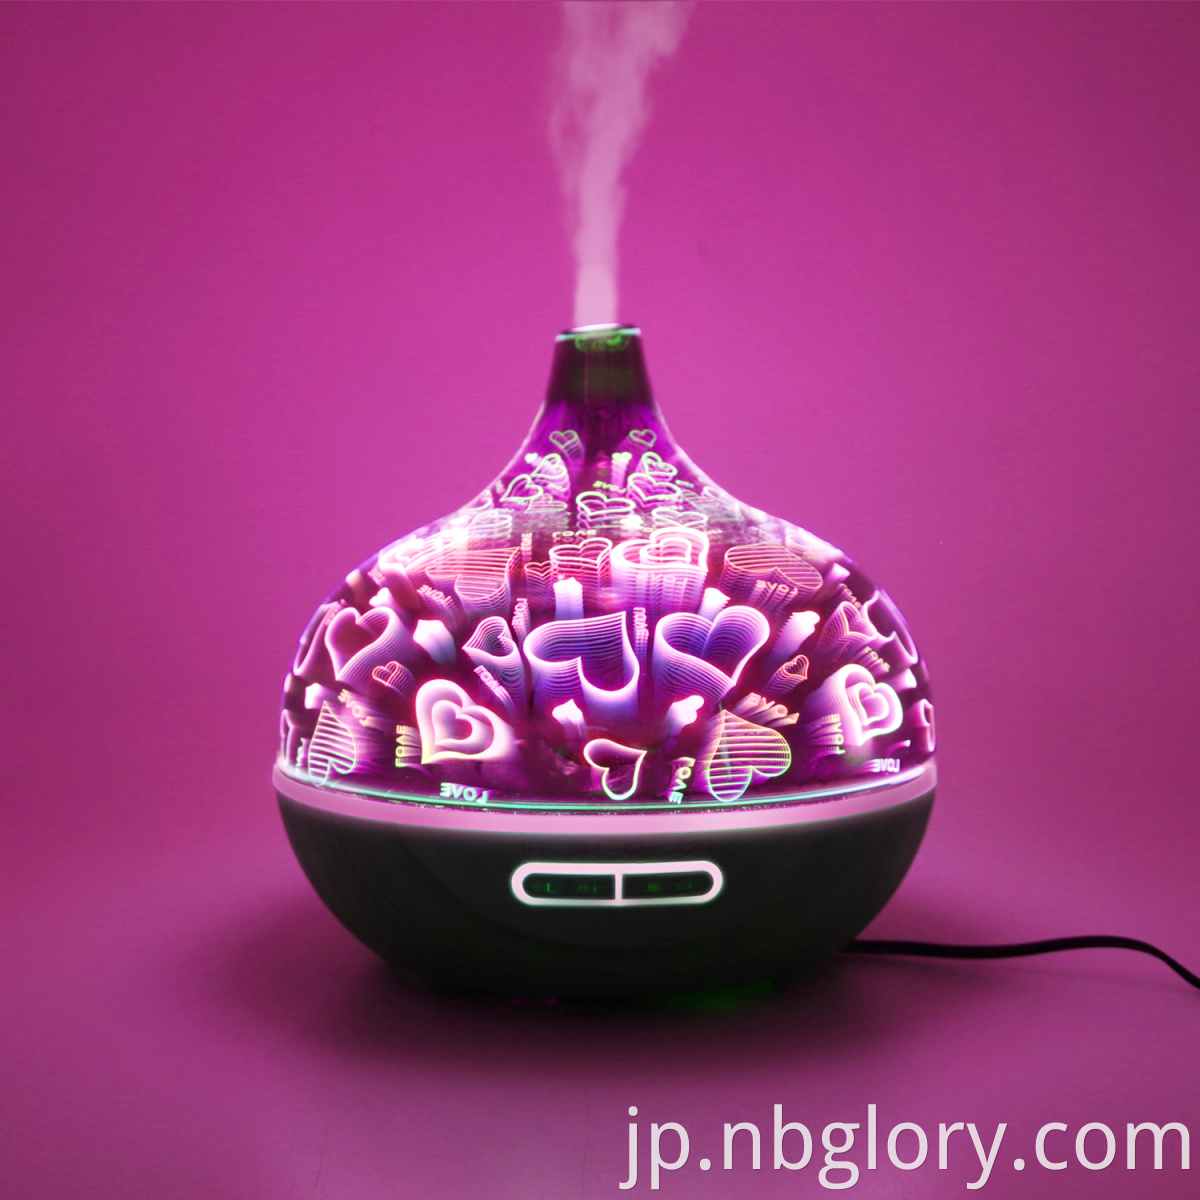 Glass Aromatherapy Essential Oil Diffuser